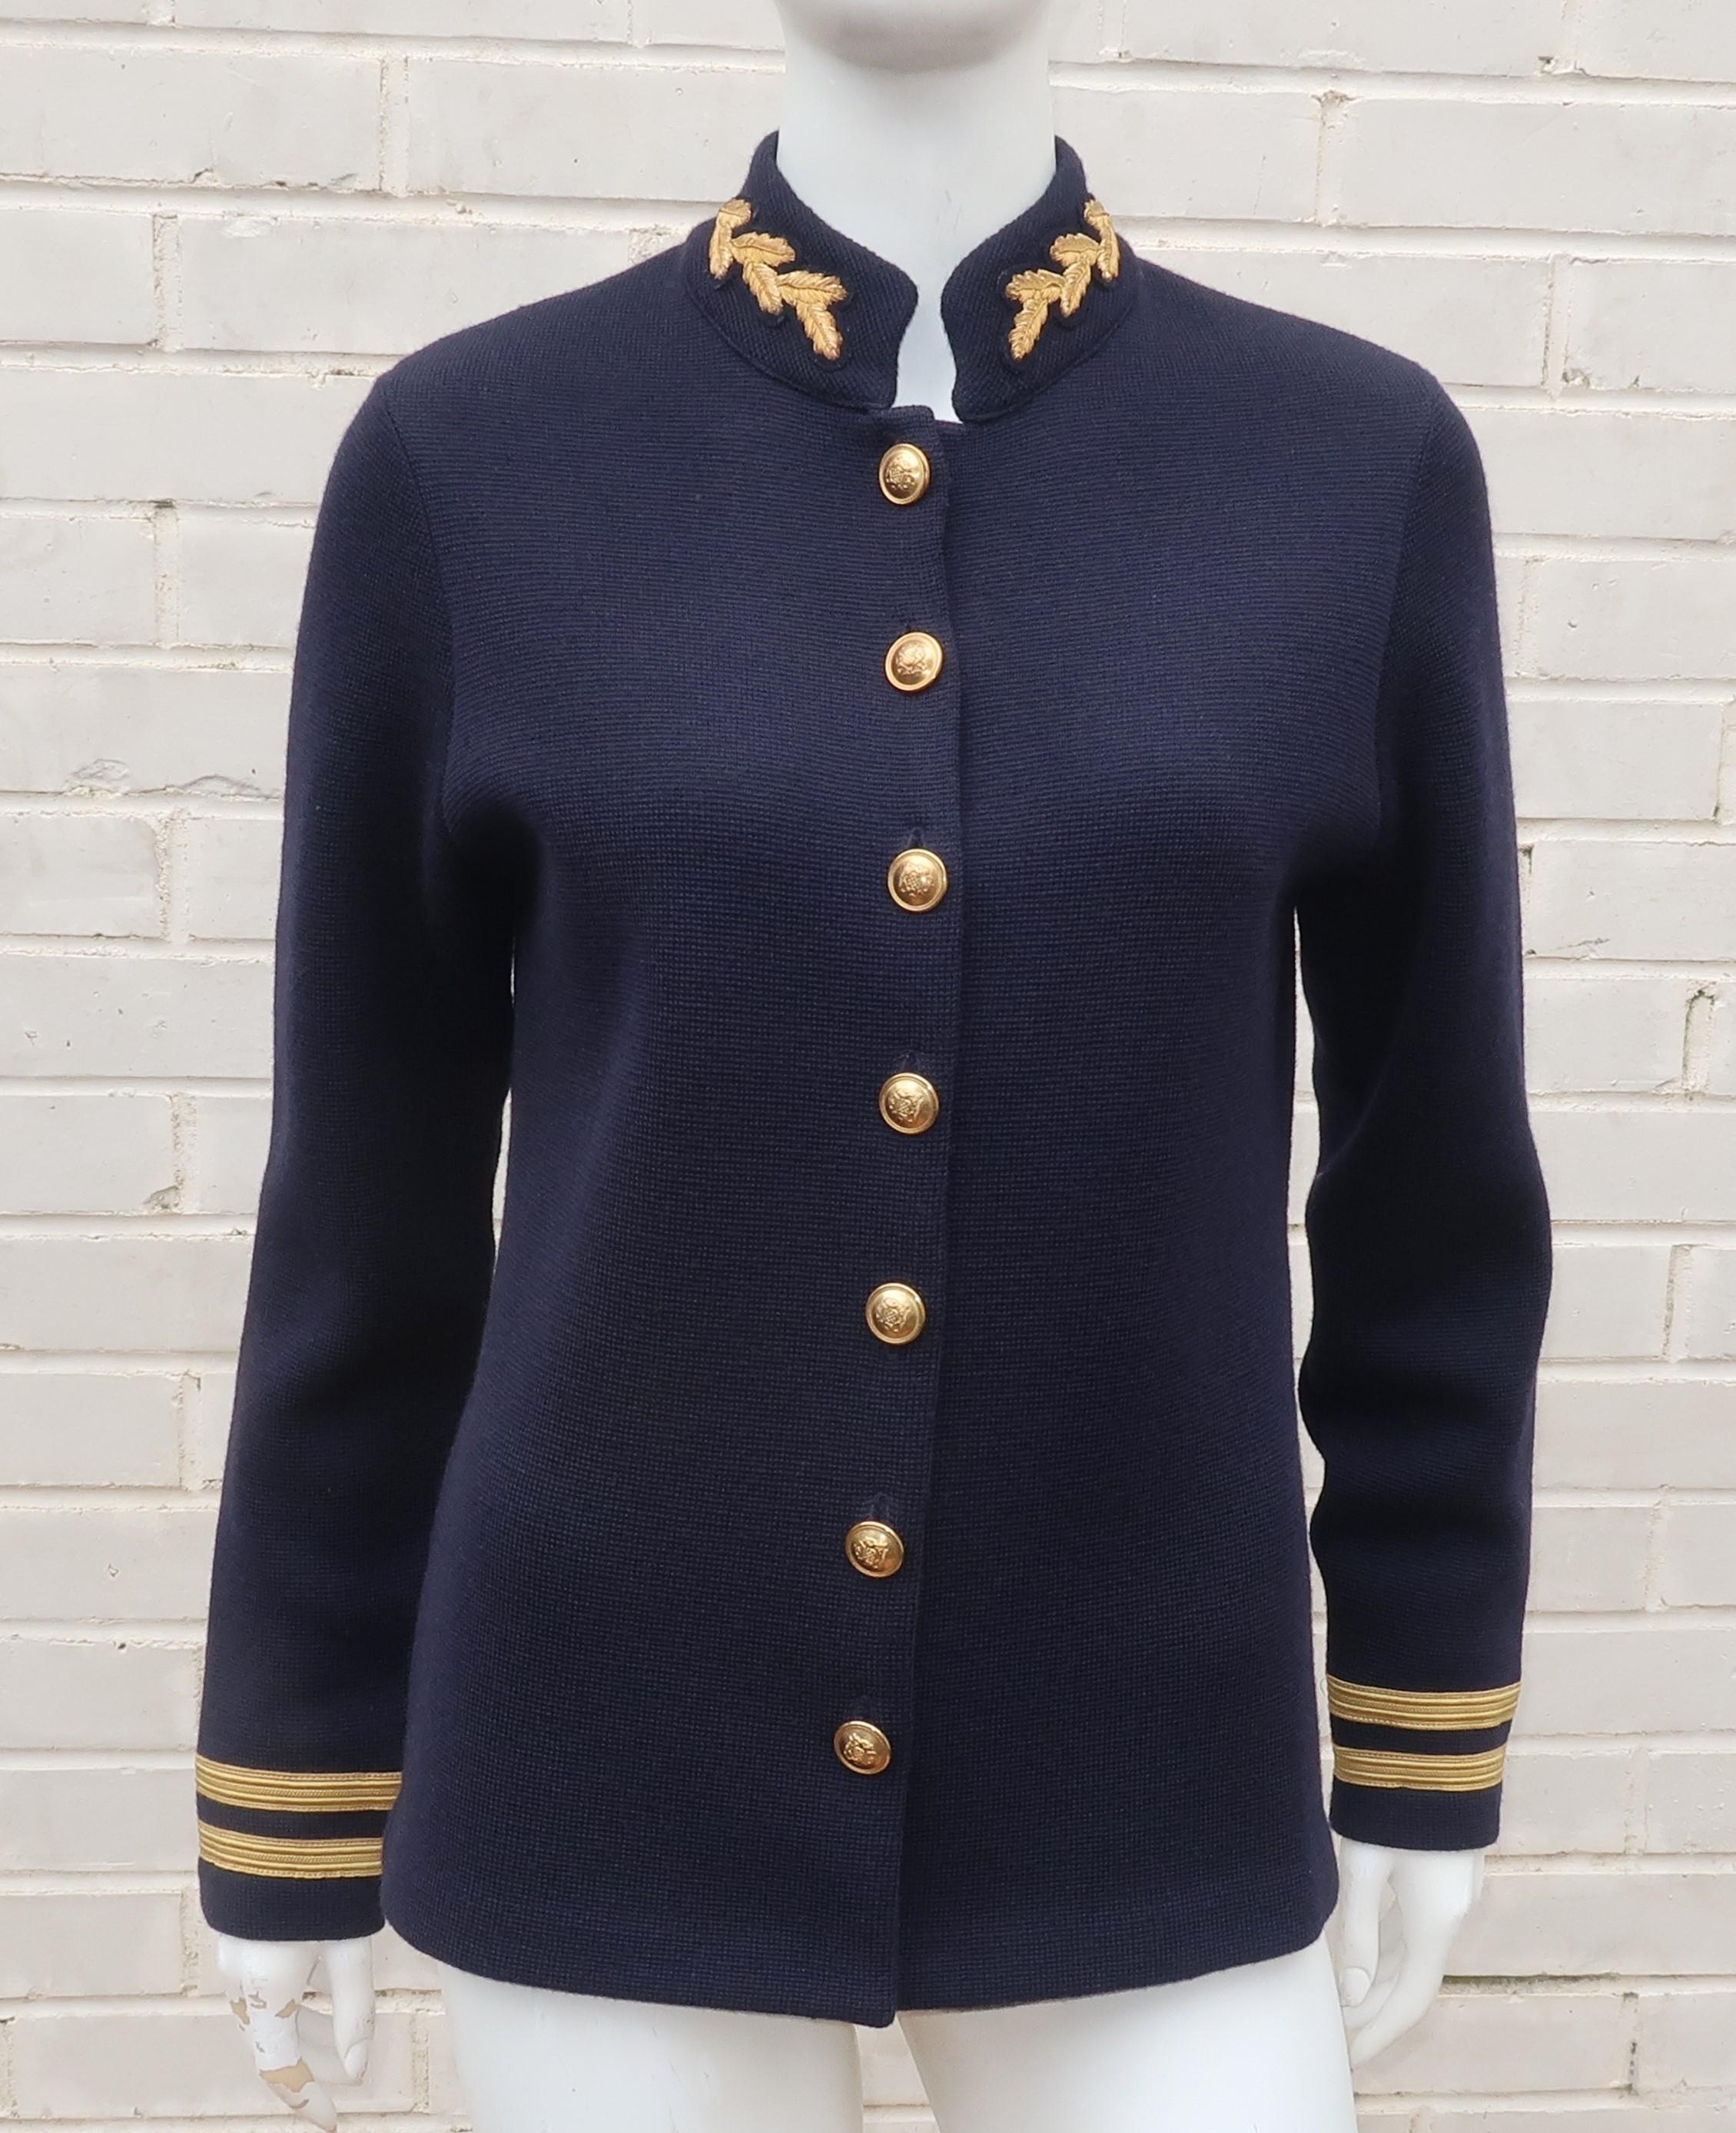 Ralph Lauren puts a fashionable spin on a military look with this wool knit cardigan sweater that resembles a Navy jacket.  The decorative gold laurel leaf appliques at the collar, insignia buttons and braiding at the cuffs are the perfect accents